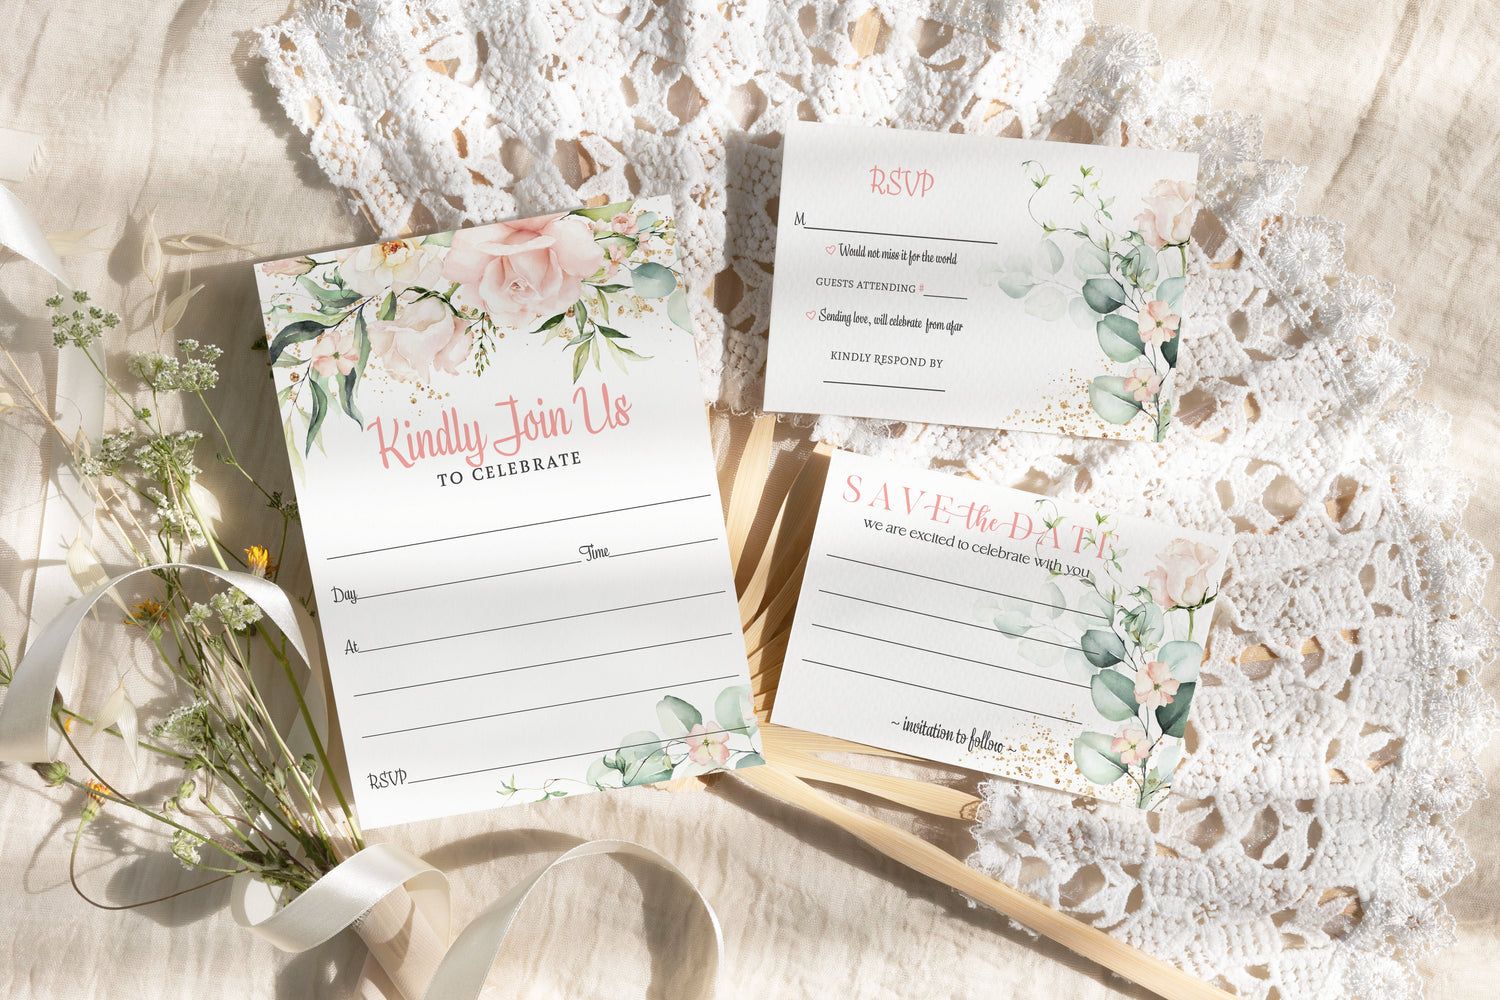 Tailor-made for any style, our invites add a personal touch to your special day.&nbsp;